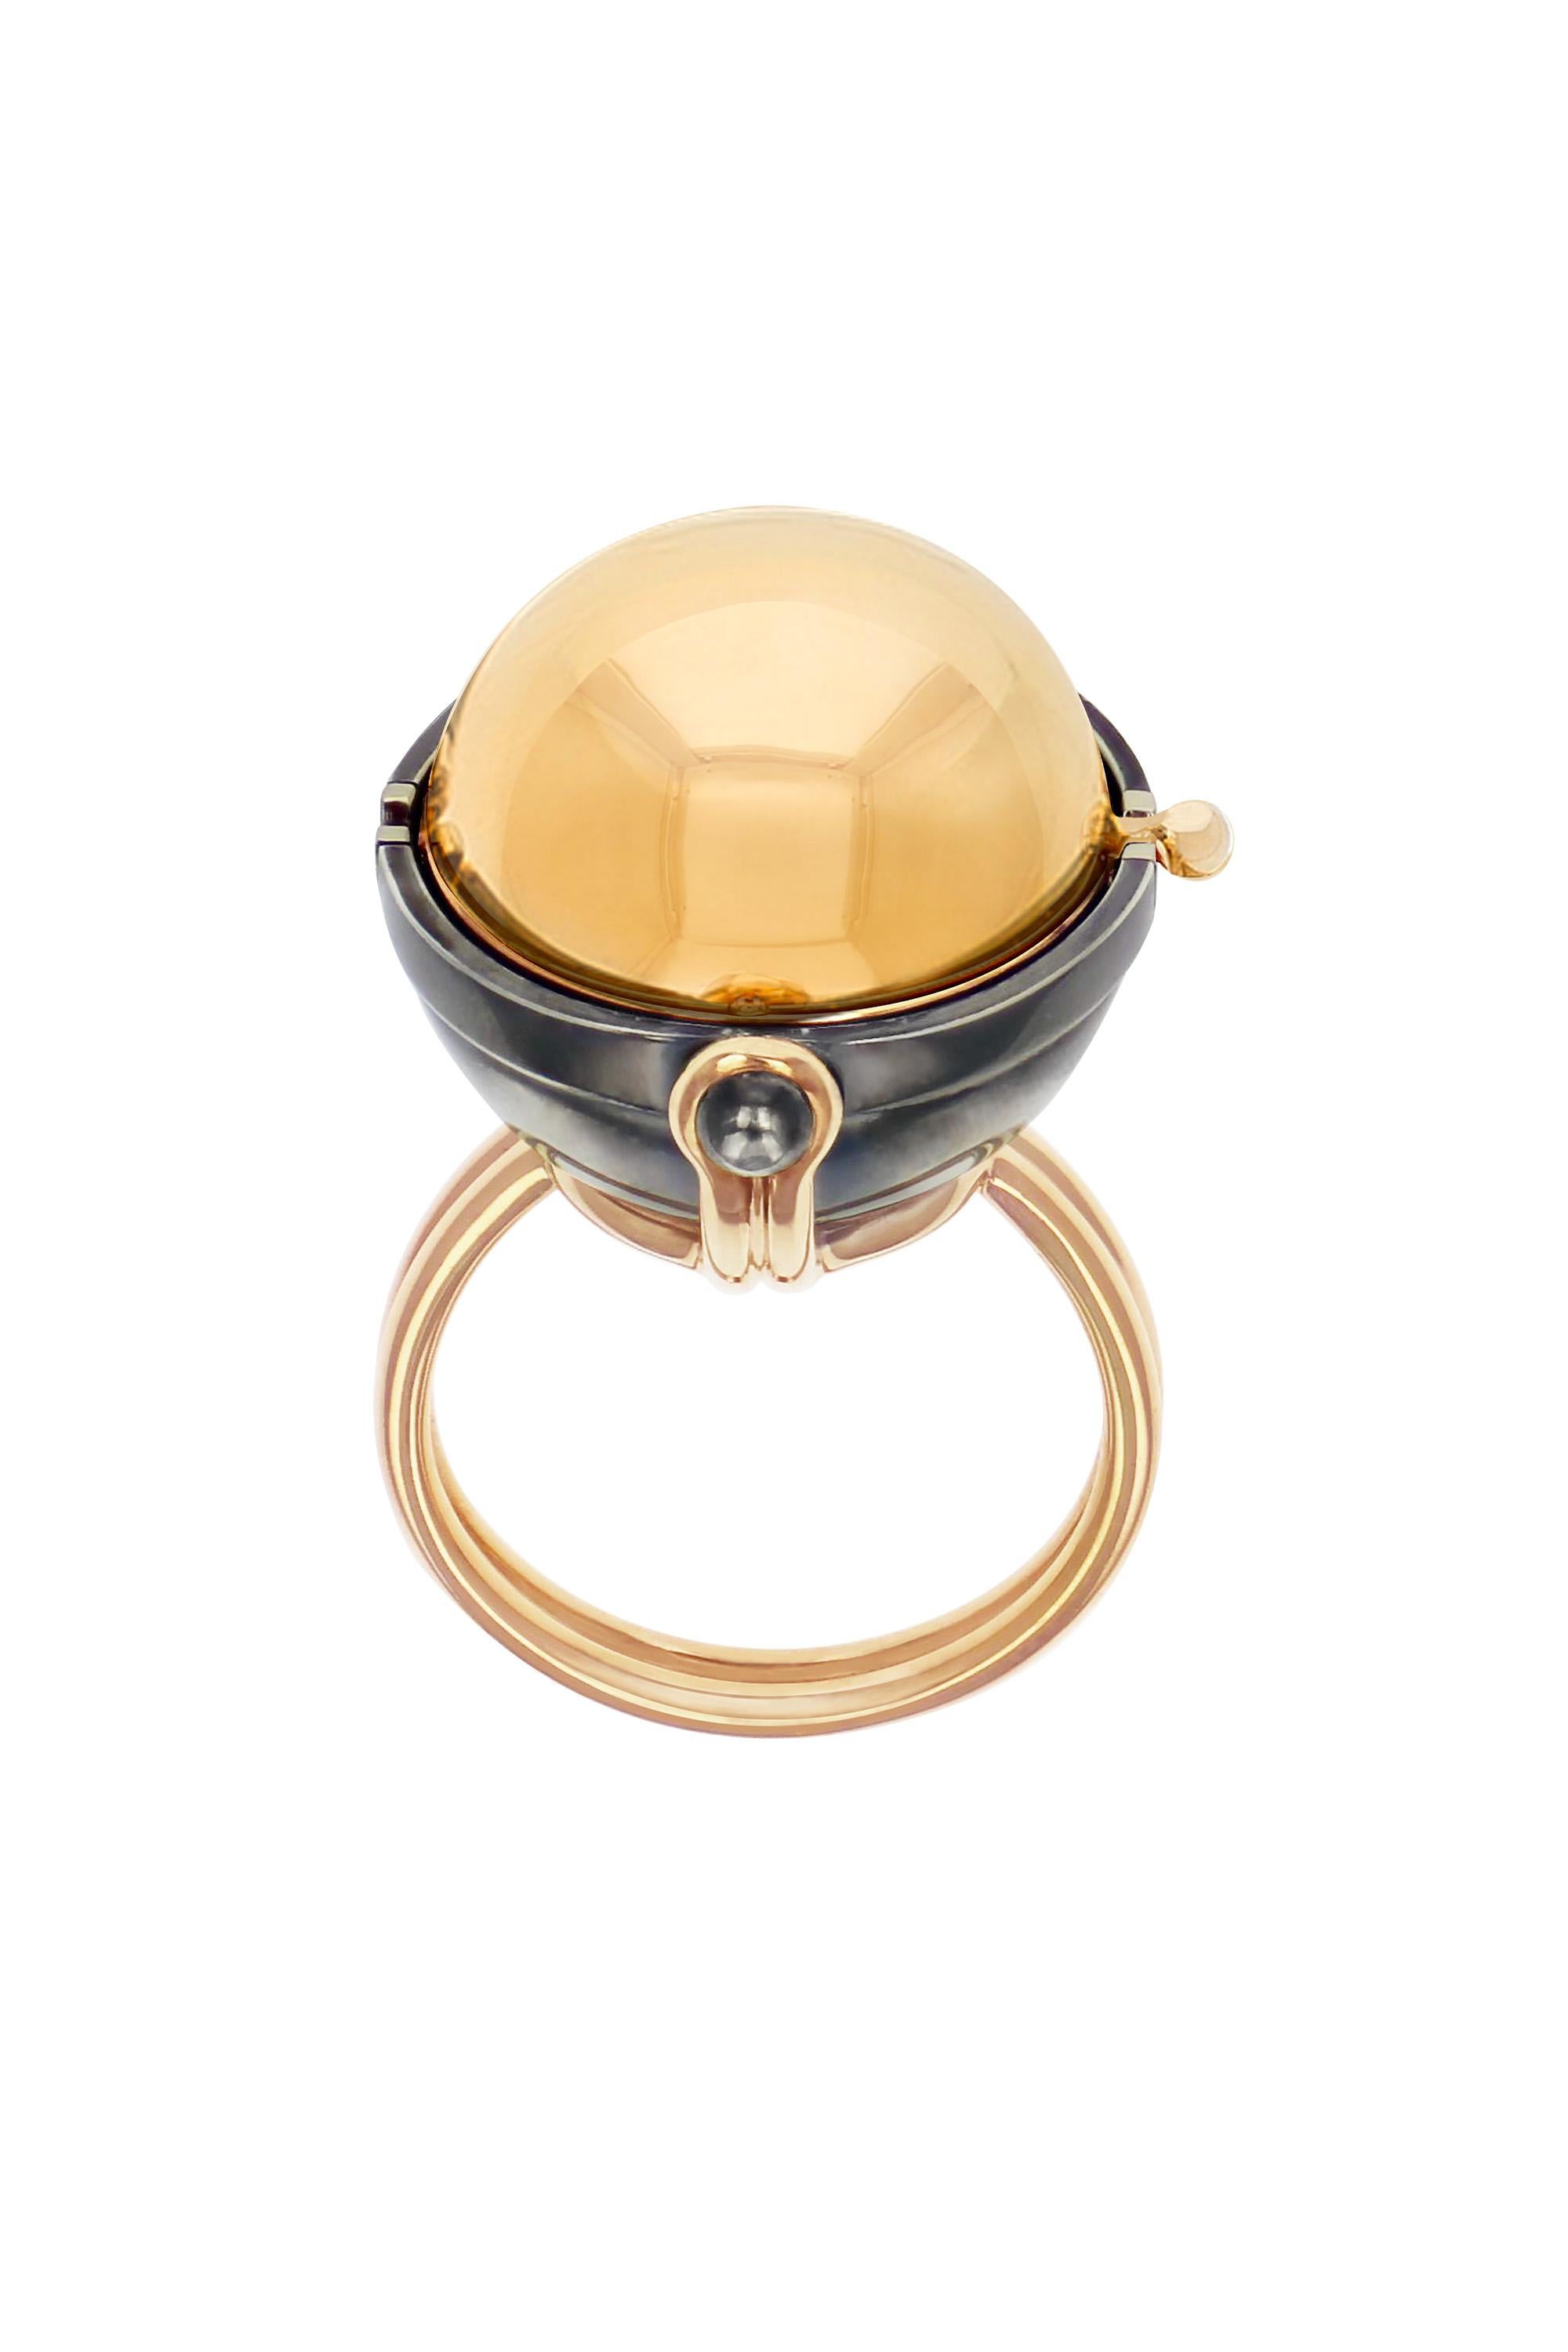 Old Mine Cut Diamond Sphere Ring in 18k Yellow Gold by Elie Top In New Condition For Sale In Paris, France